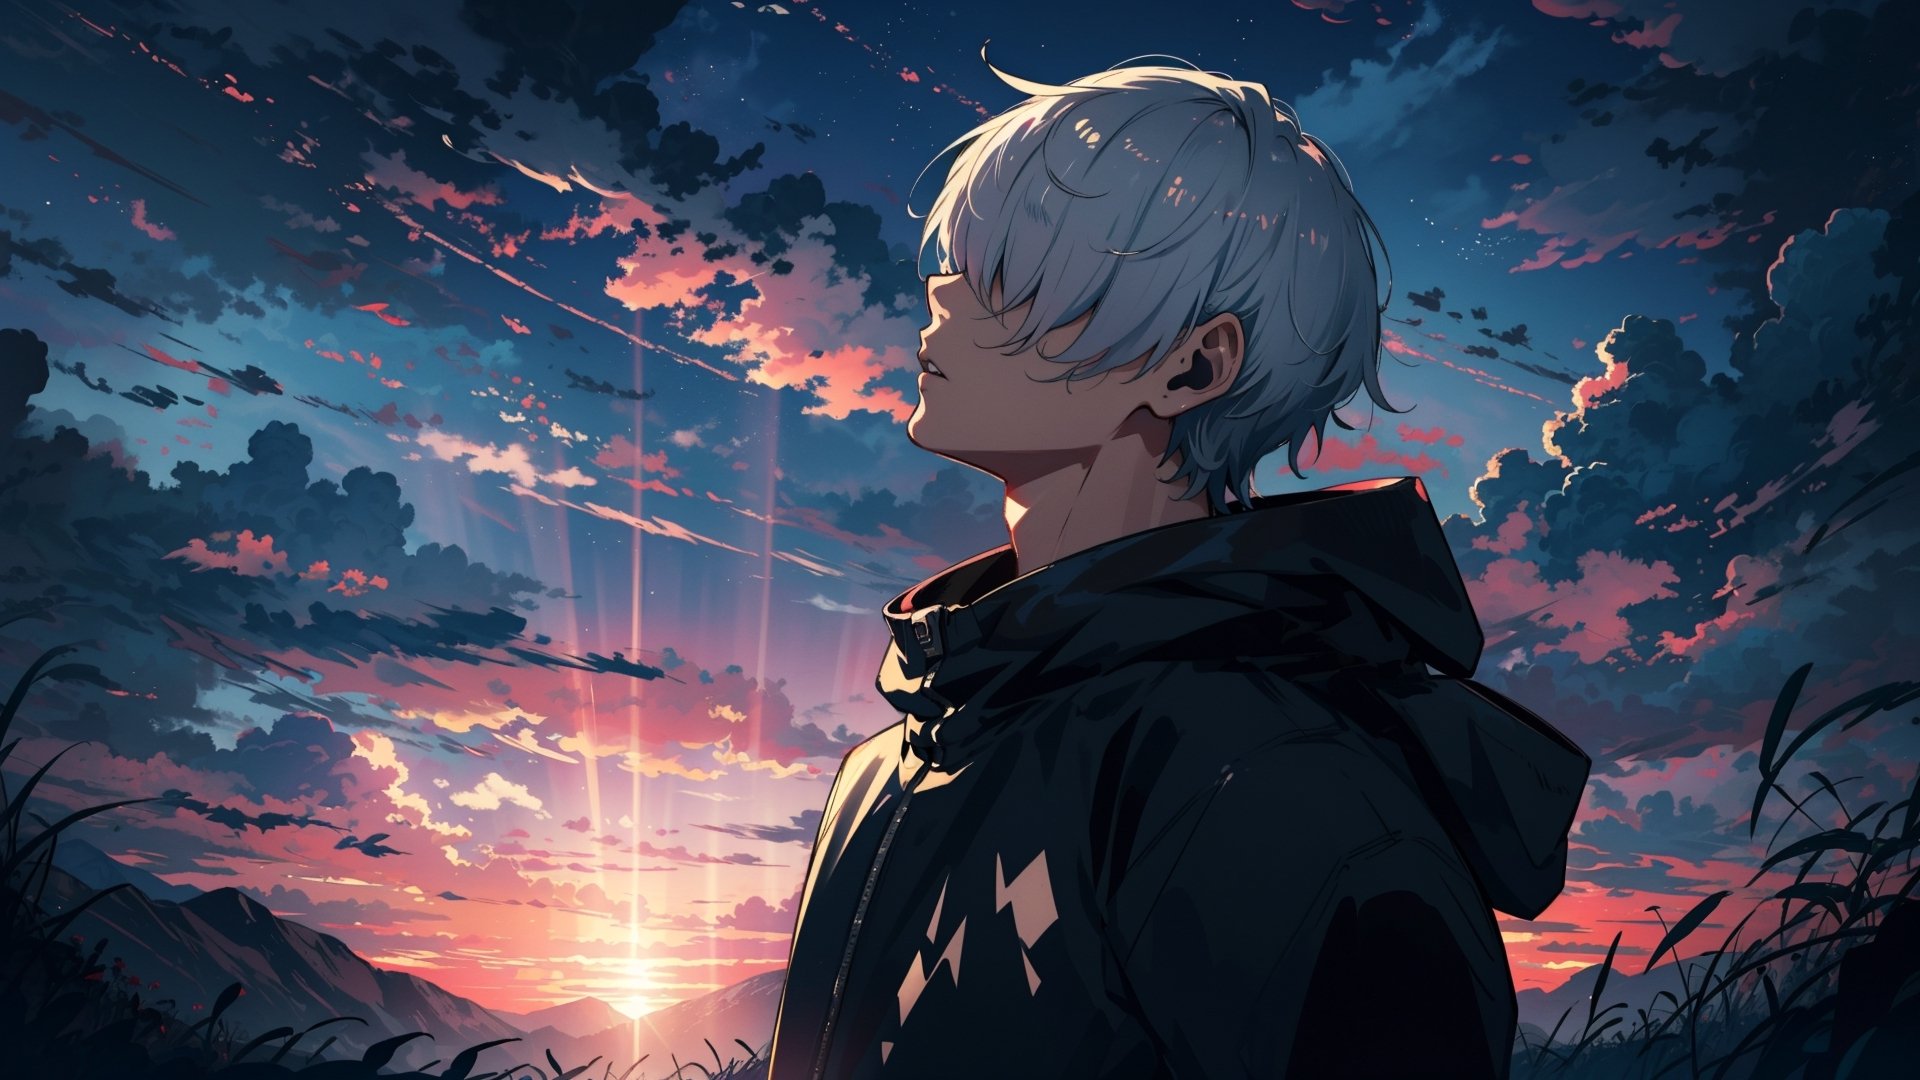 cute shota, (solo), (long_dynamic_hooded_jacket), (white hair), (upper_body), Looking viewer, (epic sky:1.5), KanekiMeme, looking up, hair over eyes, natural lighting, soft lighting, sunlight, HDR (High Dynamic Range), Maximum Clarity And Sharpness, Multi-Layered Textures, midnight, masterpiece, best quality,